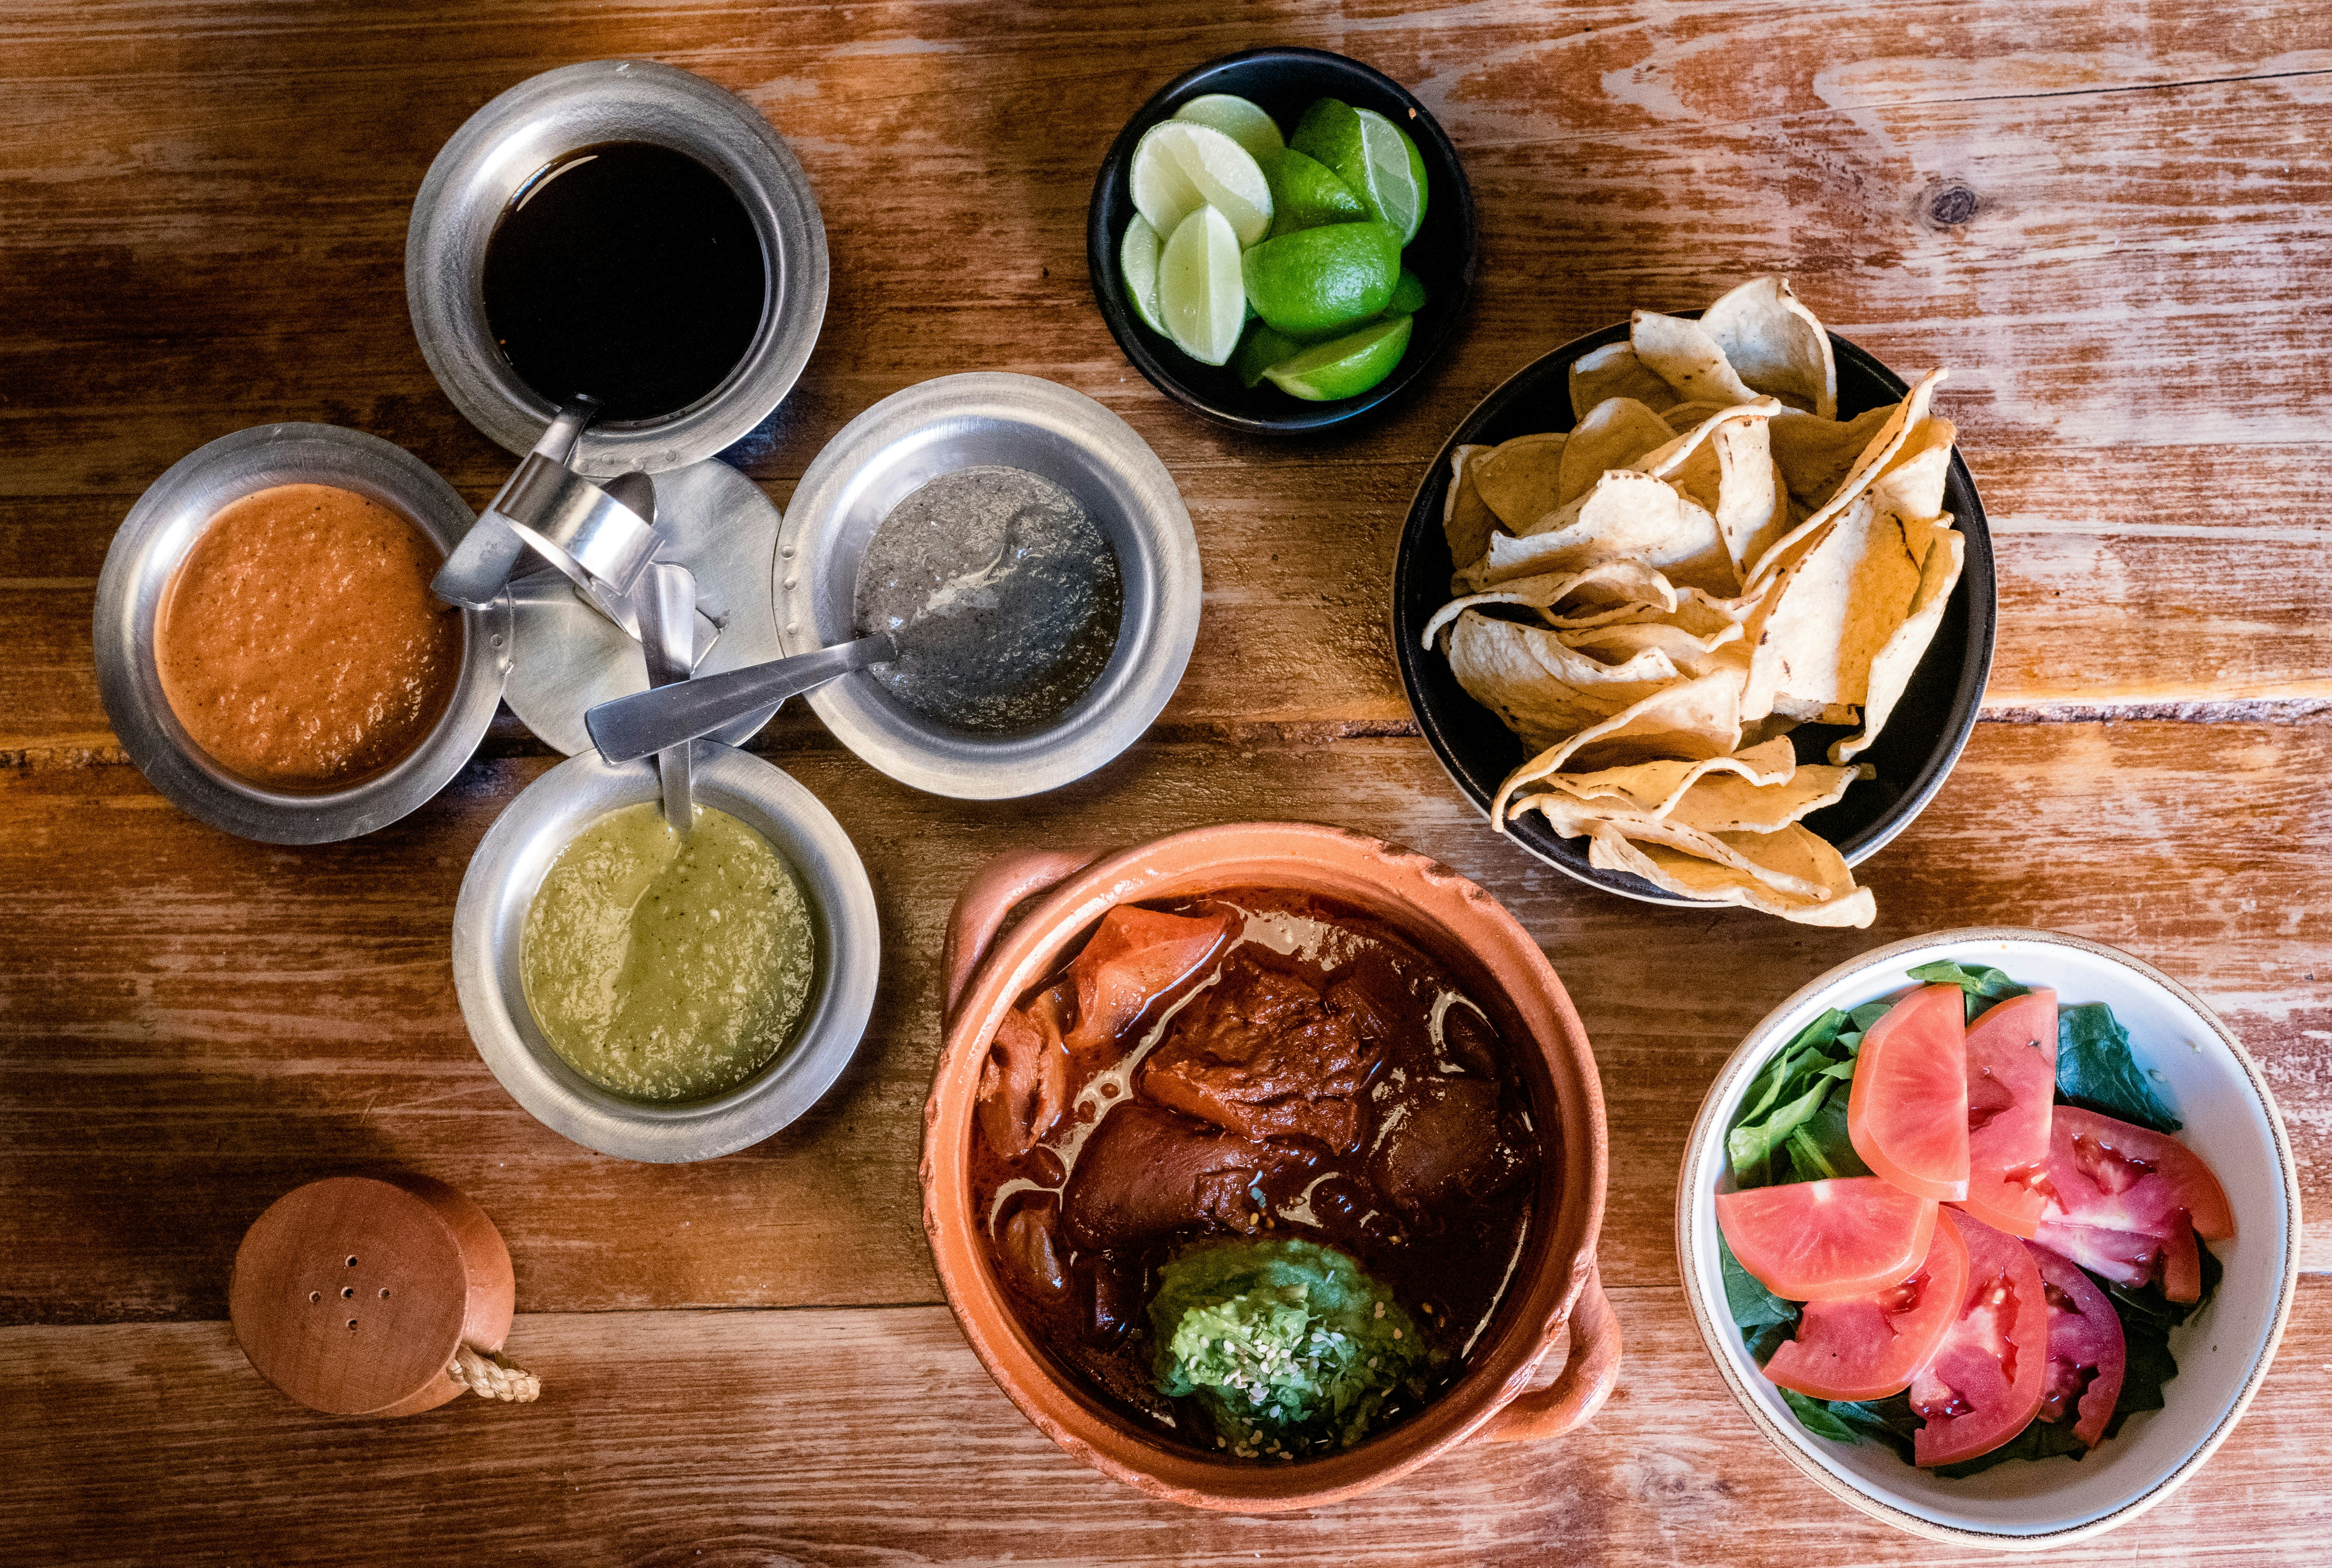 Aerial view of tacos, sliced limes and tomatoes, and various sauces, arranged on a wooden table